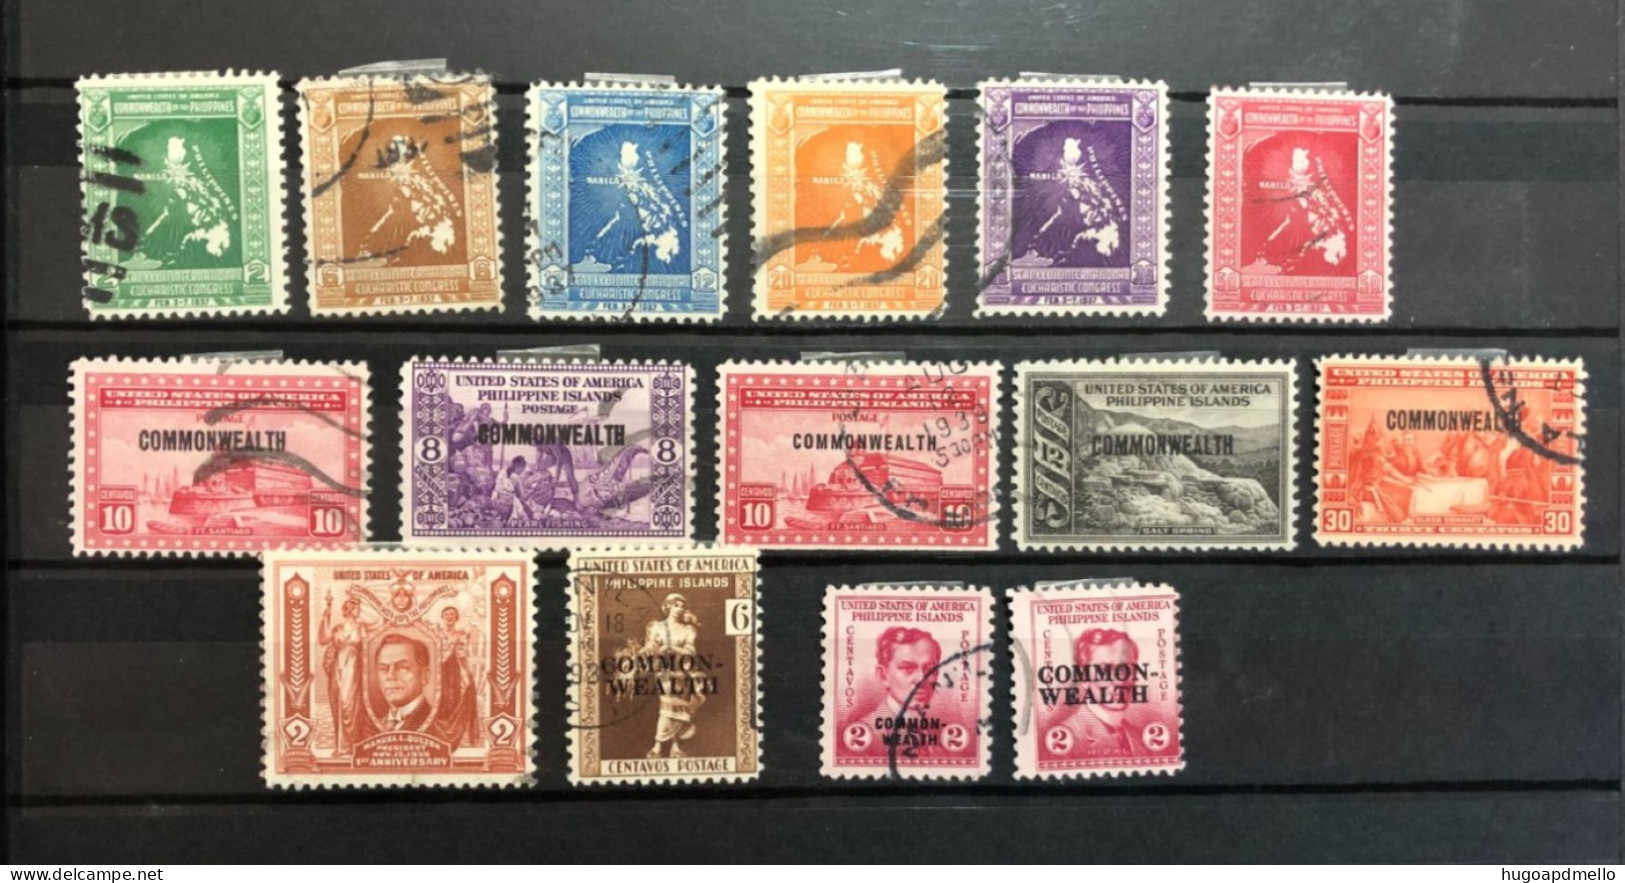 PHILIPPINES Islands (United States Possession & Commonwealth ), Lot Composed Of 15 Old Stamps. USED - Philippines